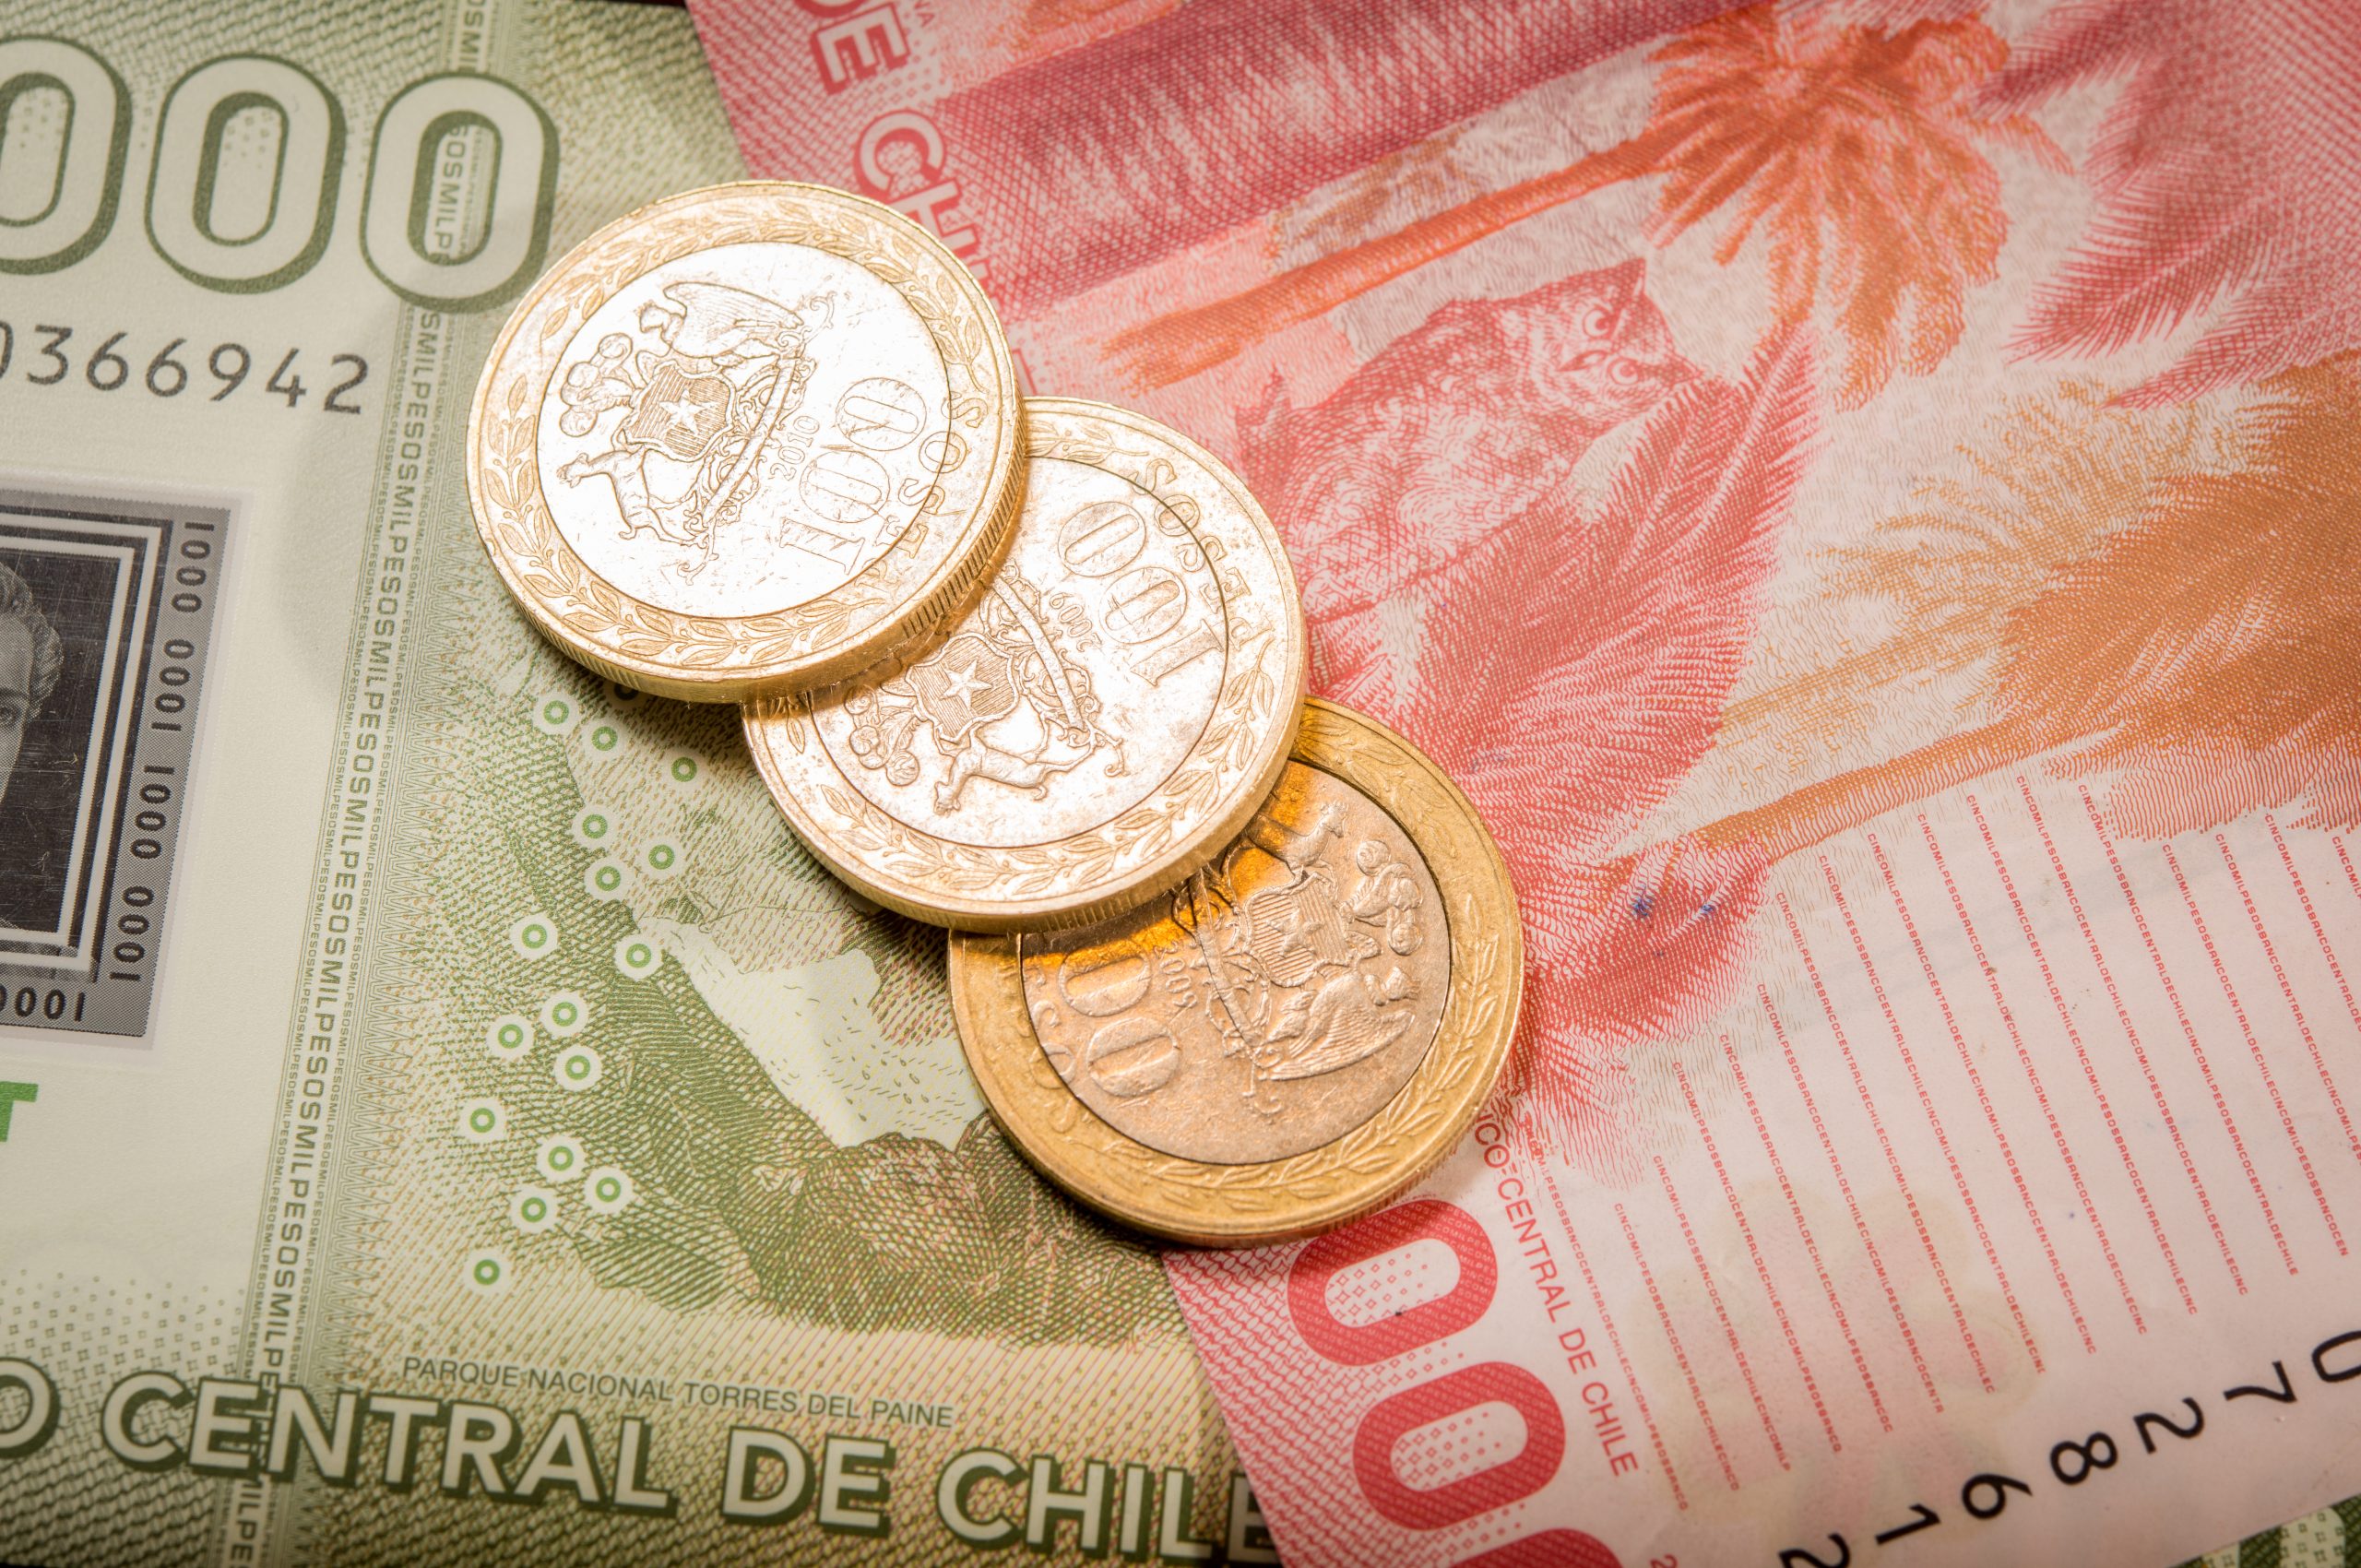 Chilean Coins And Bills